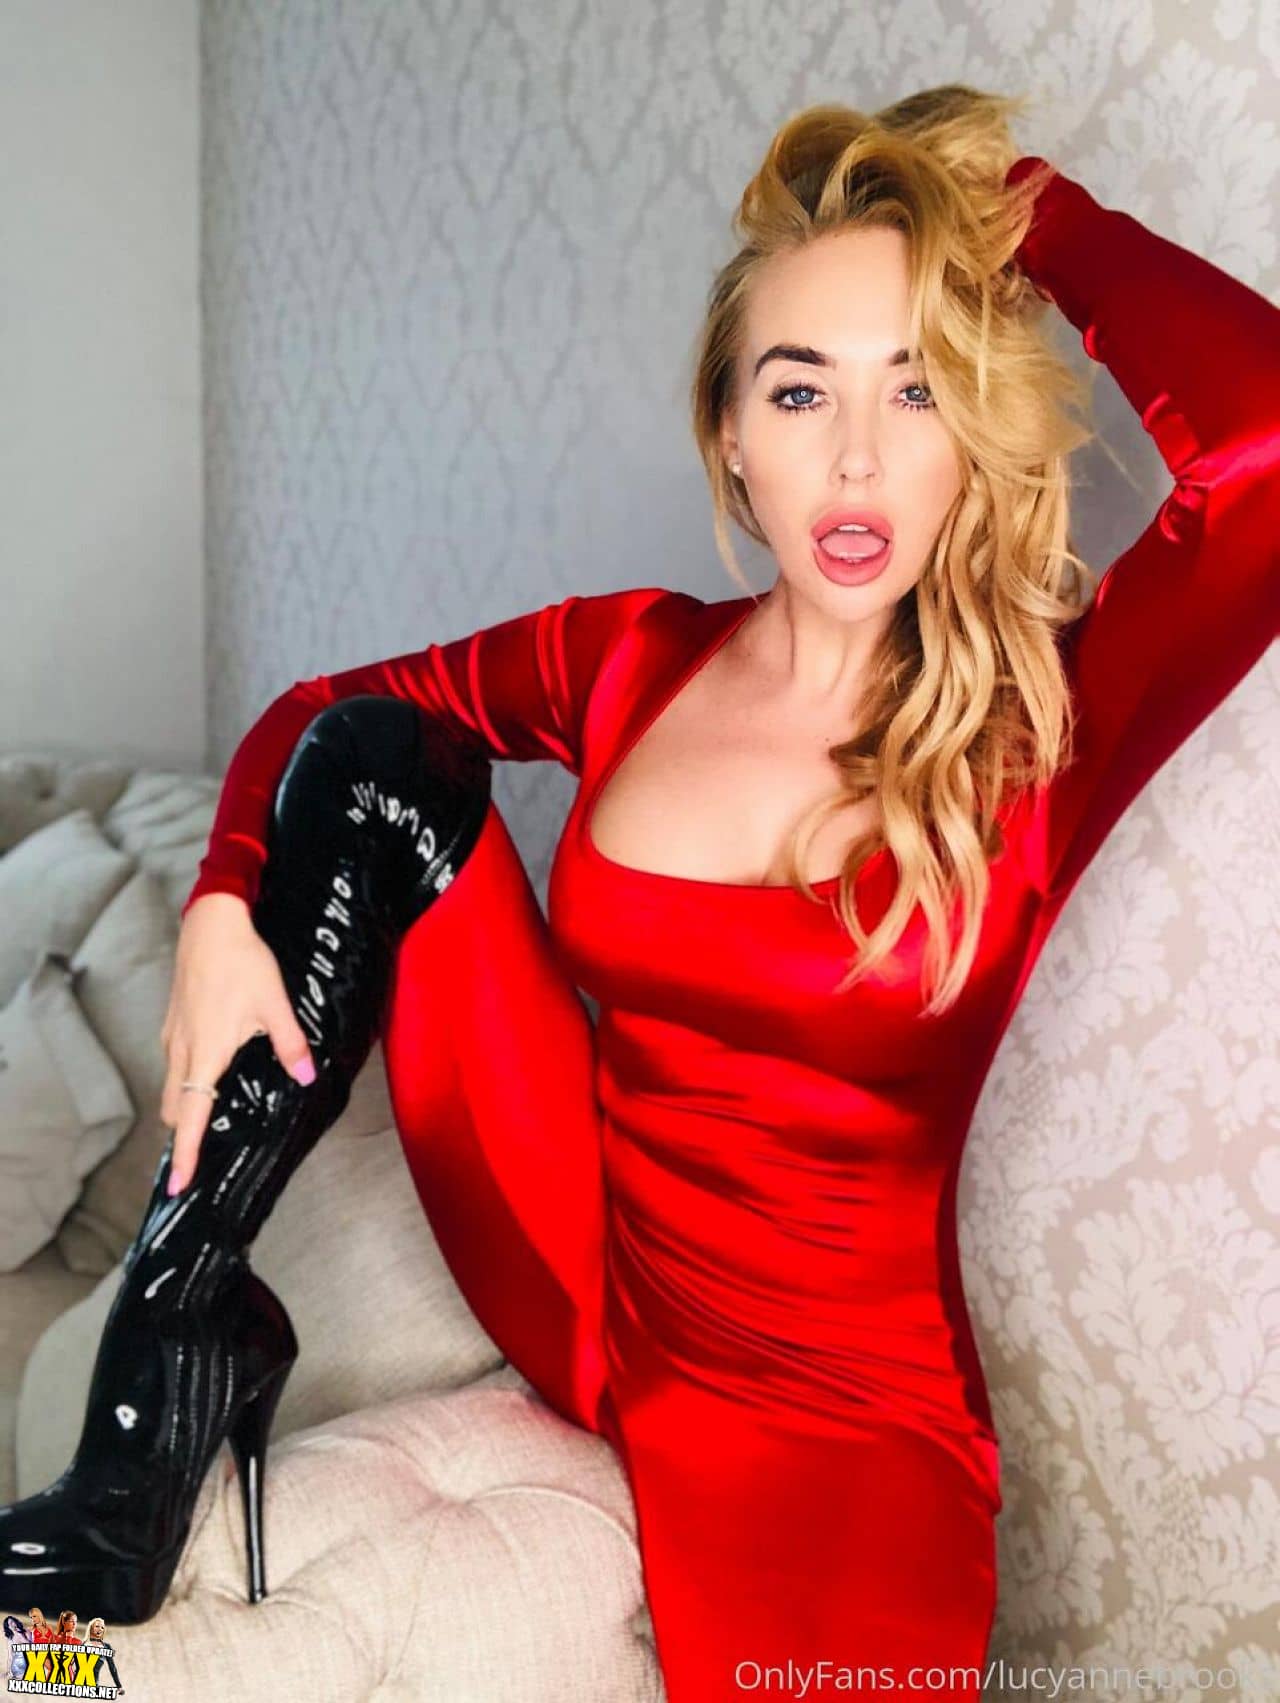 Anne brook onlyfans lucy Lucy Anne